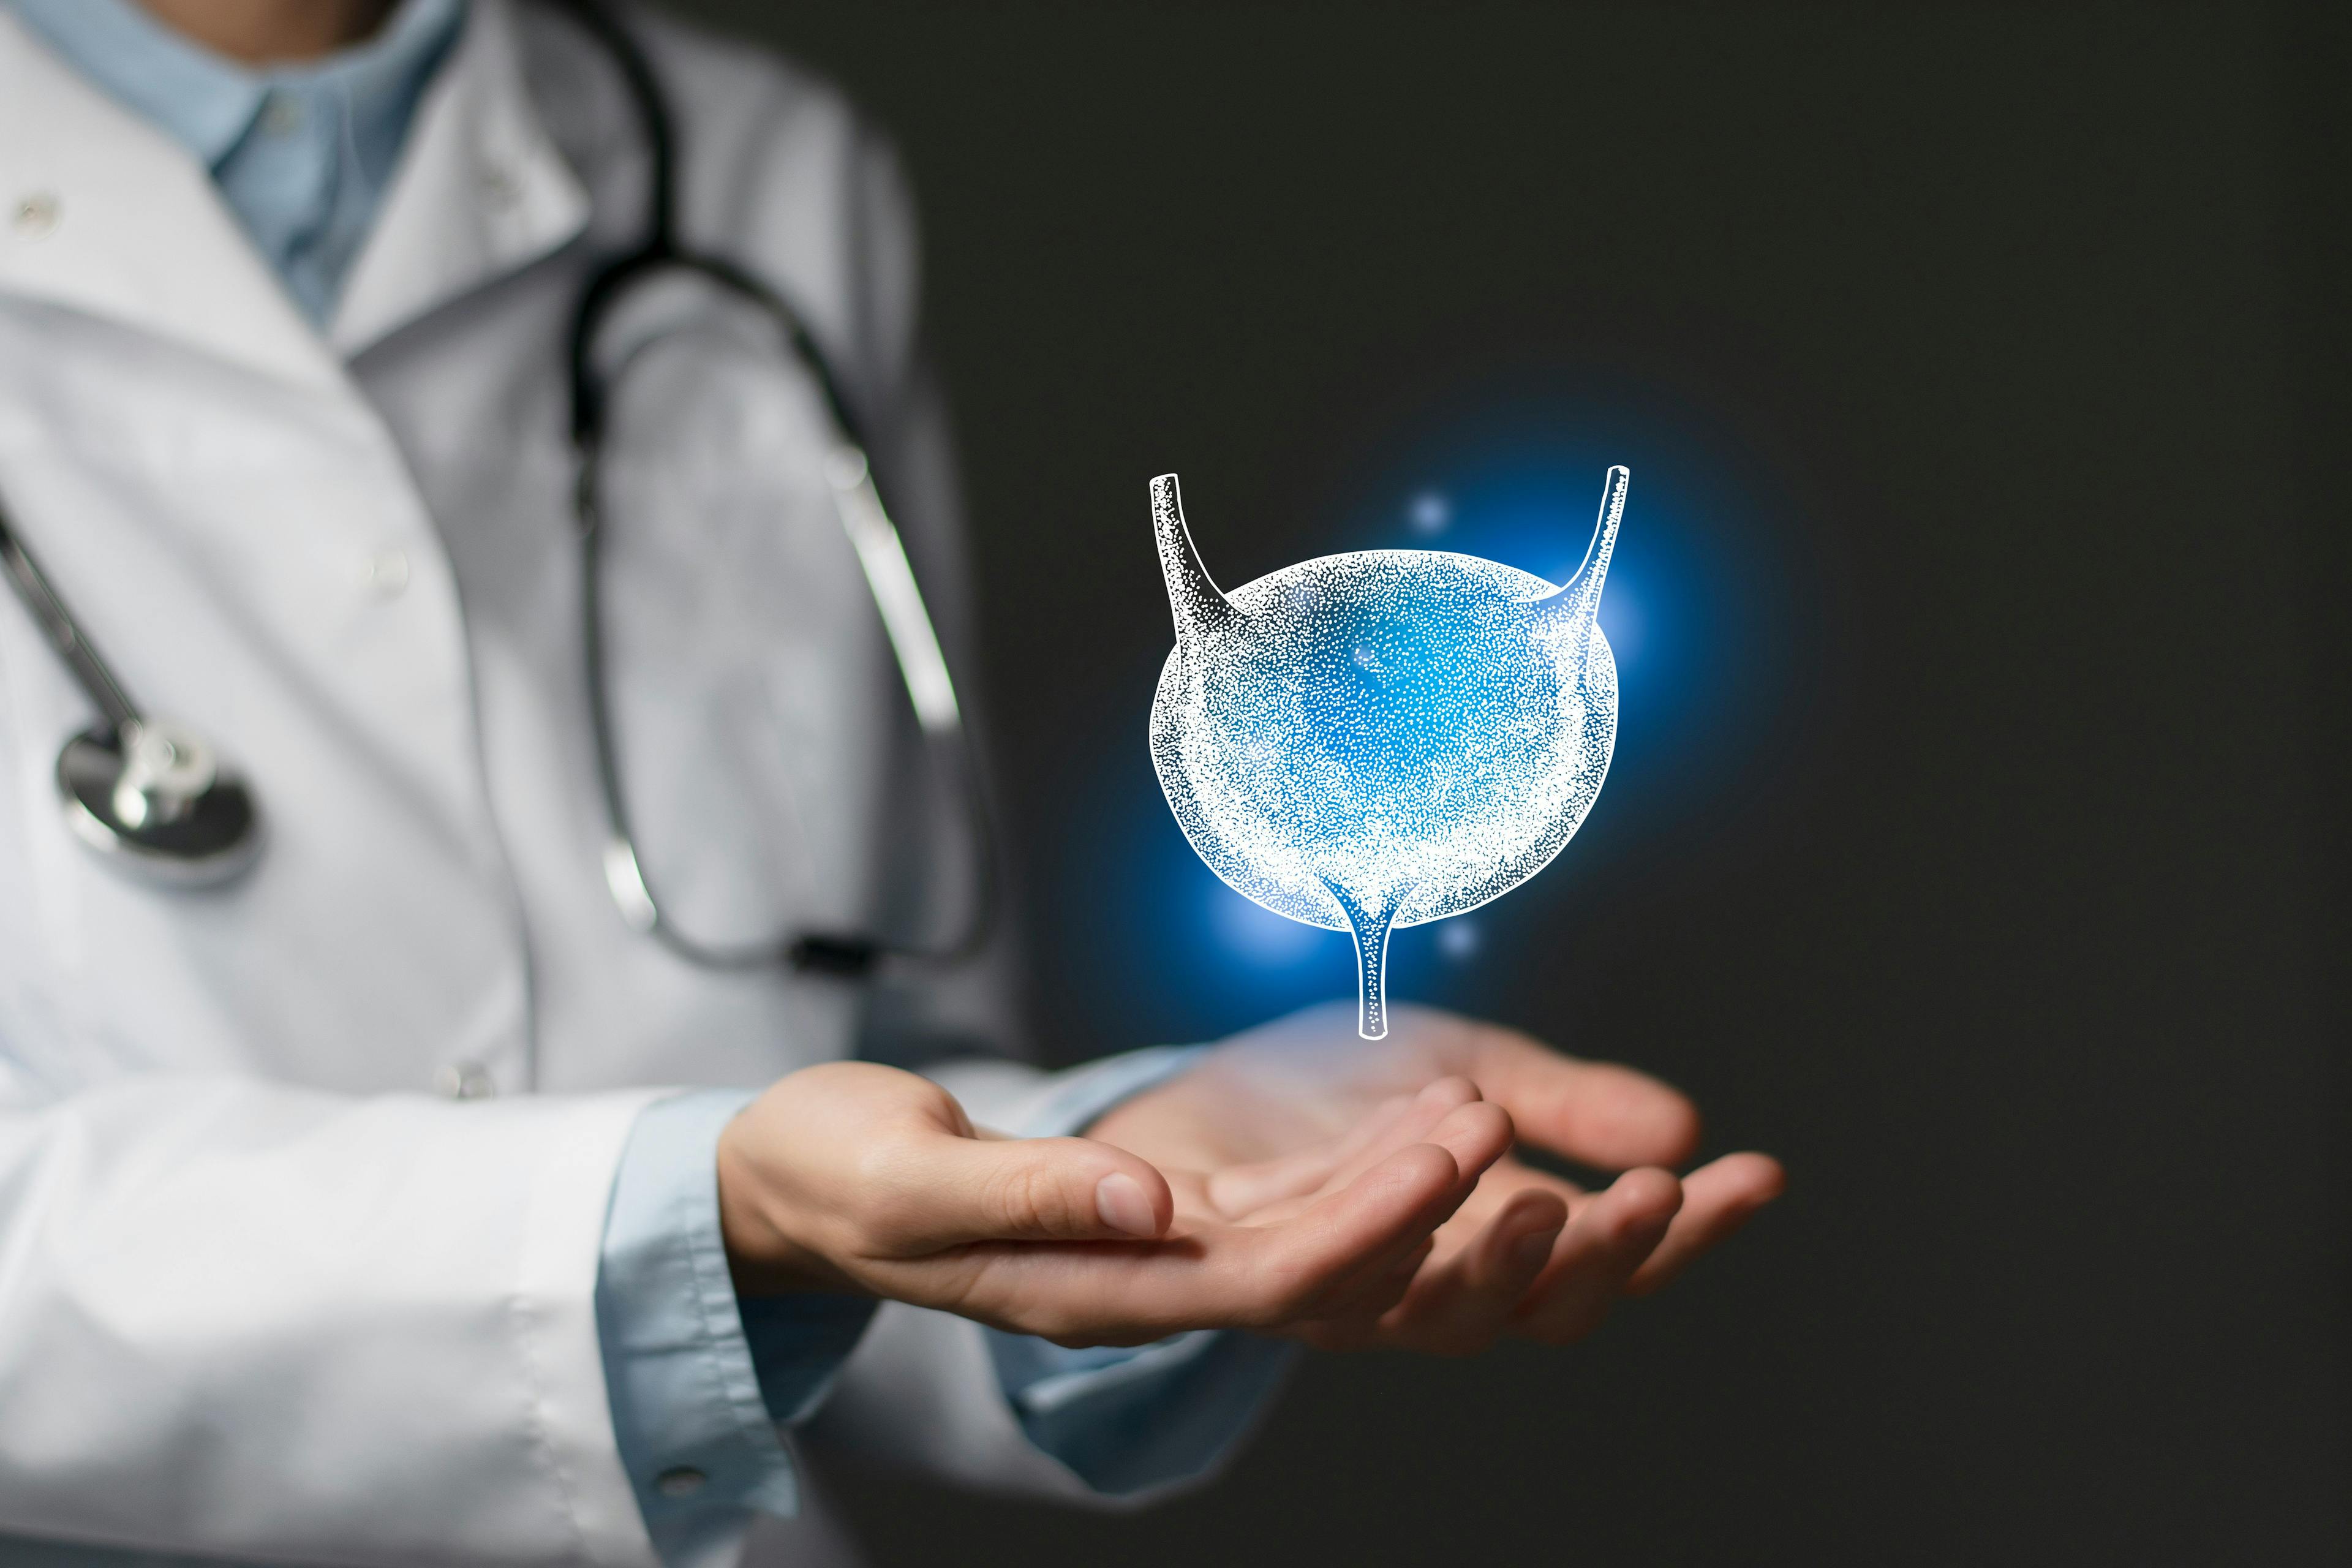 doctor in white coat with conceptual image of a bladder floating above his hands